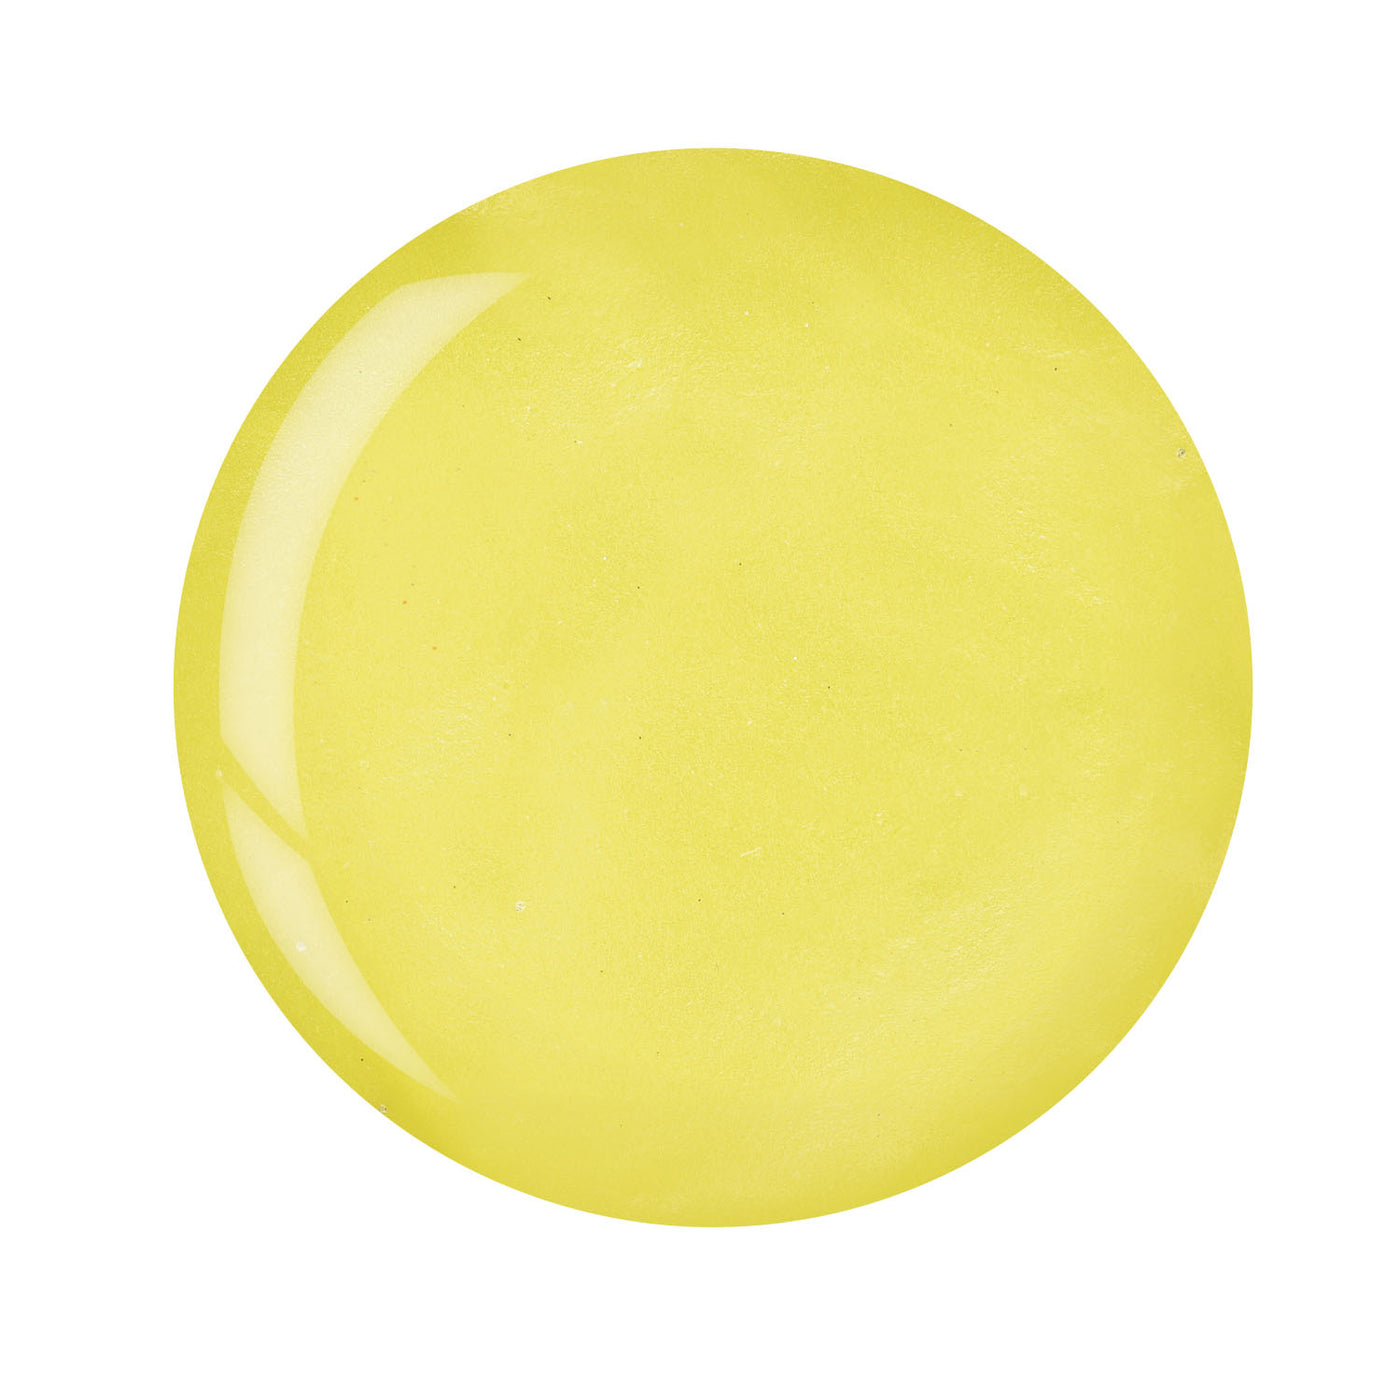 CP Dipping Powder14g - 5524-5 Bright Neon Yellow